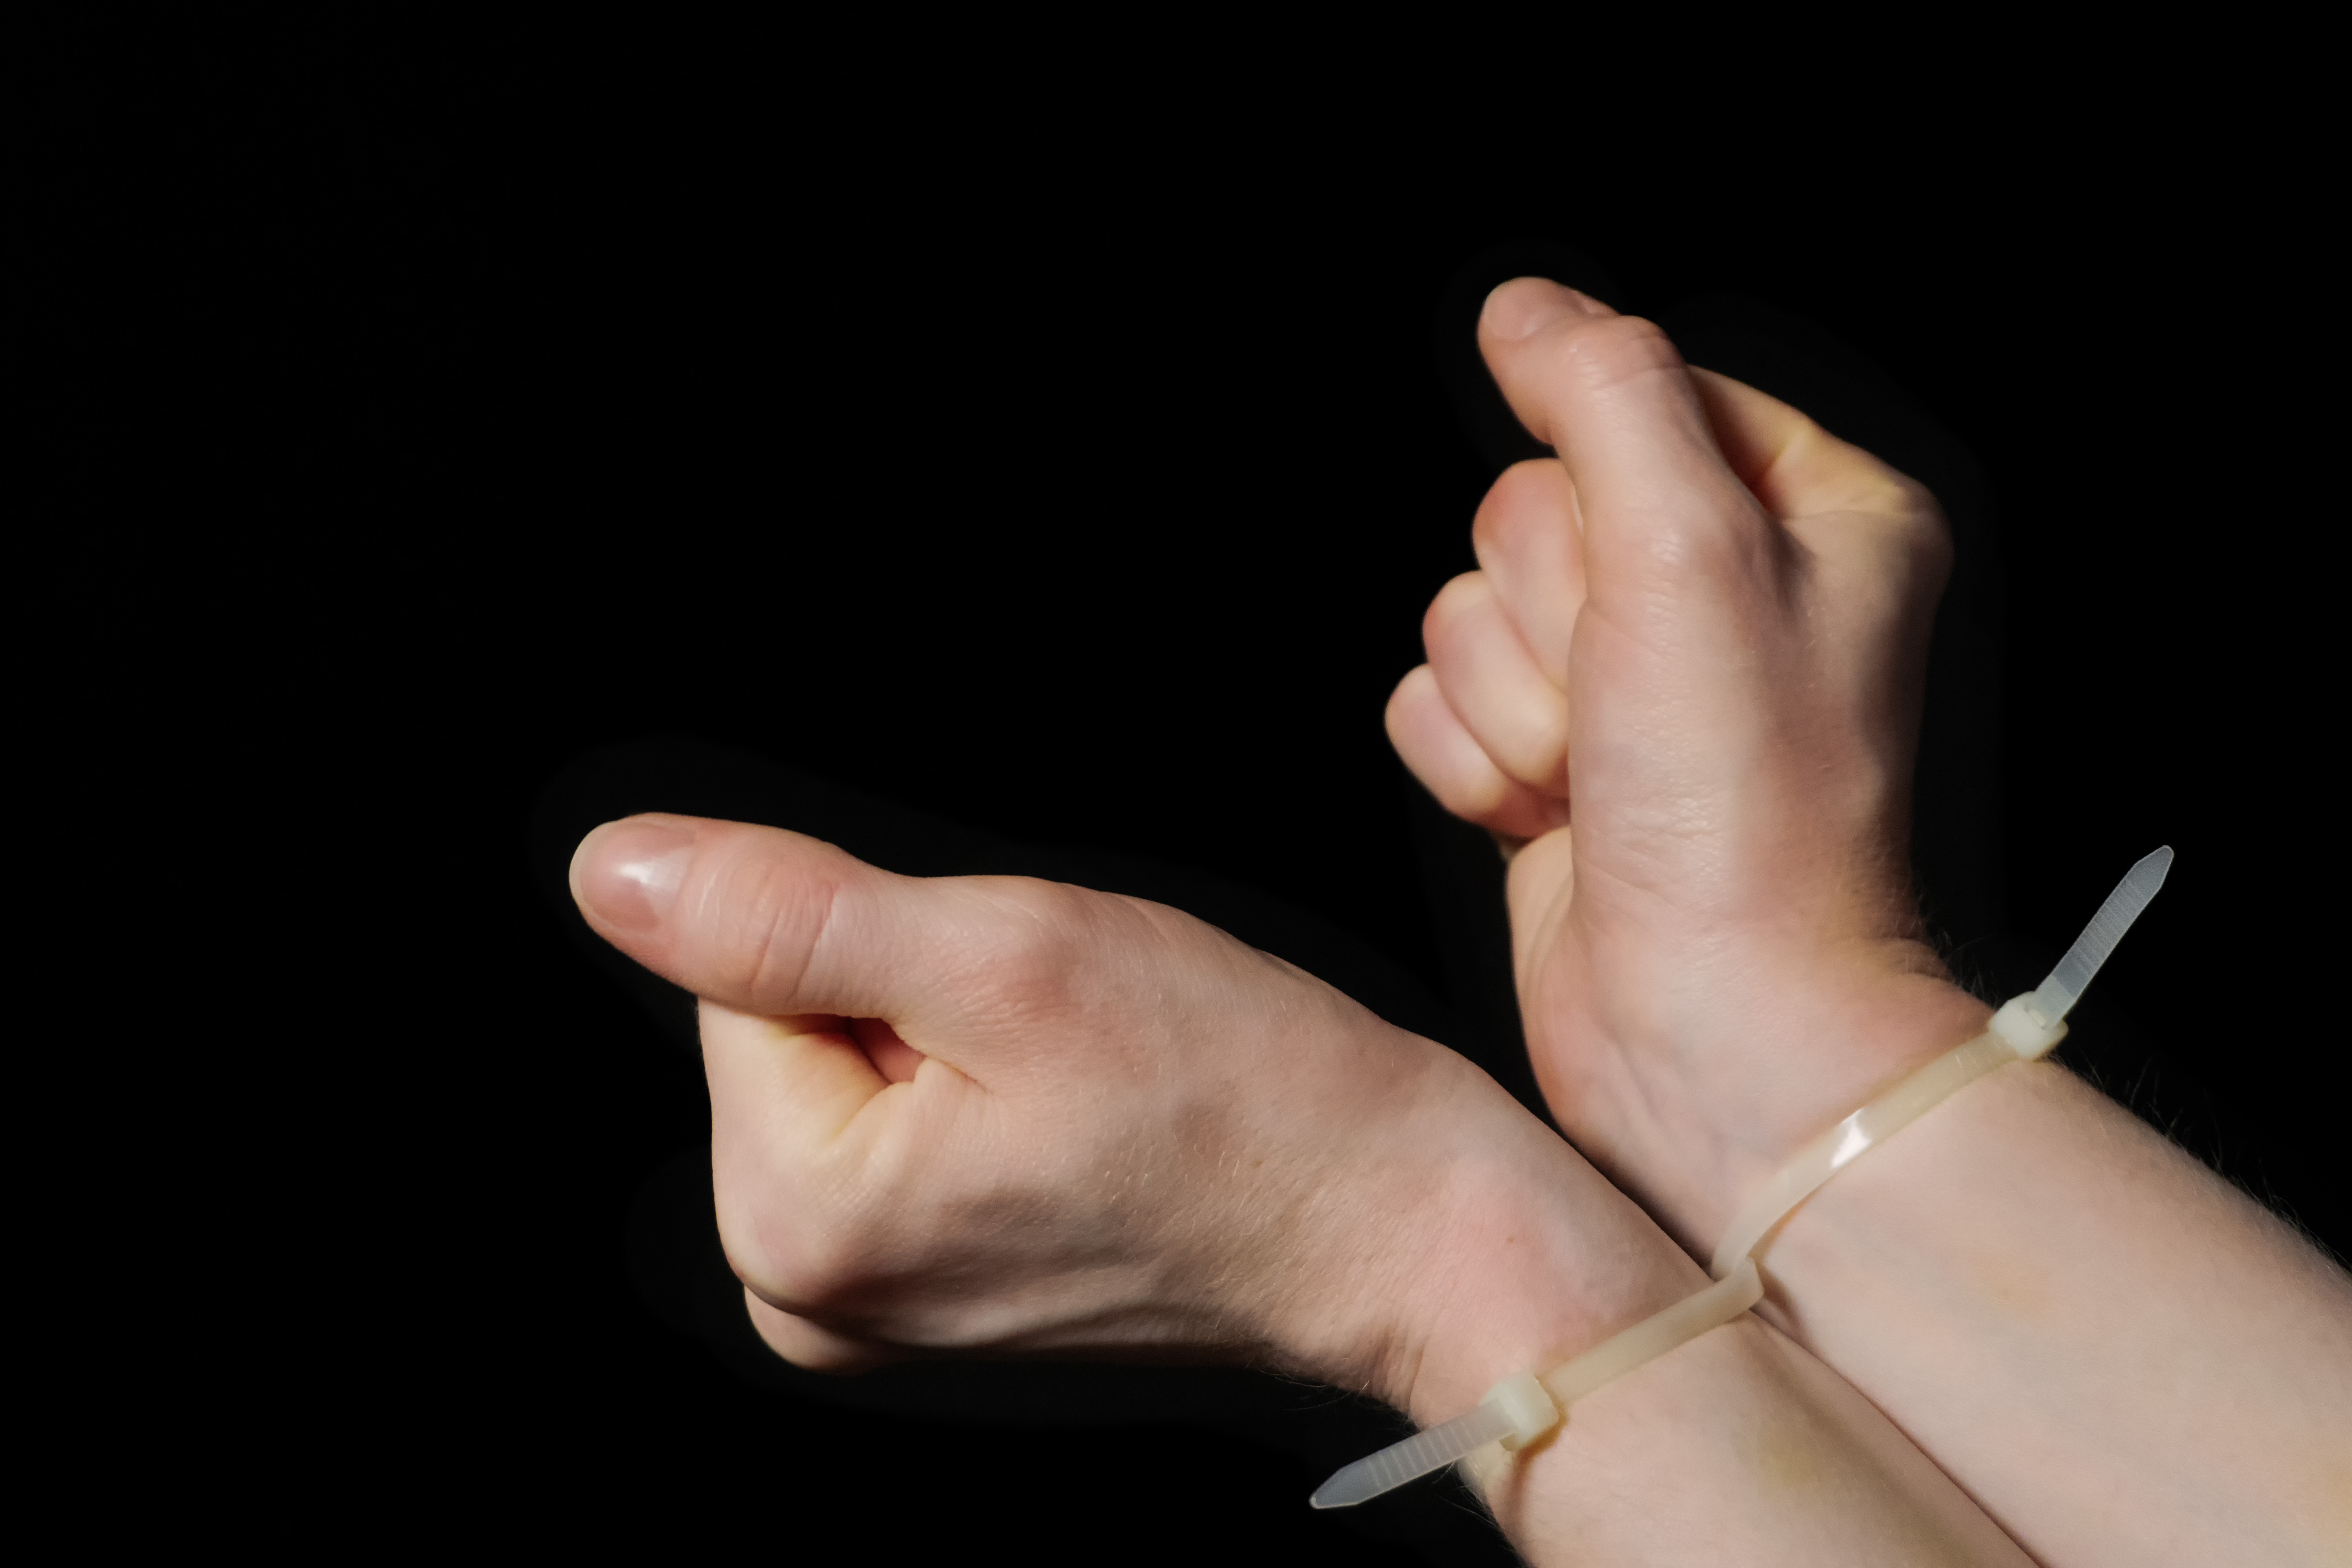 Pictured are hands restricted by a zip tie. SHUTTERSTOCK/ Nick Vakhrushev